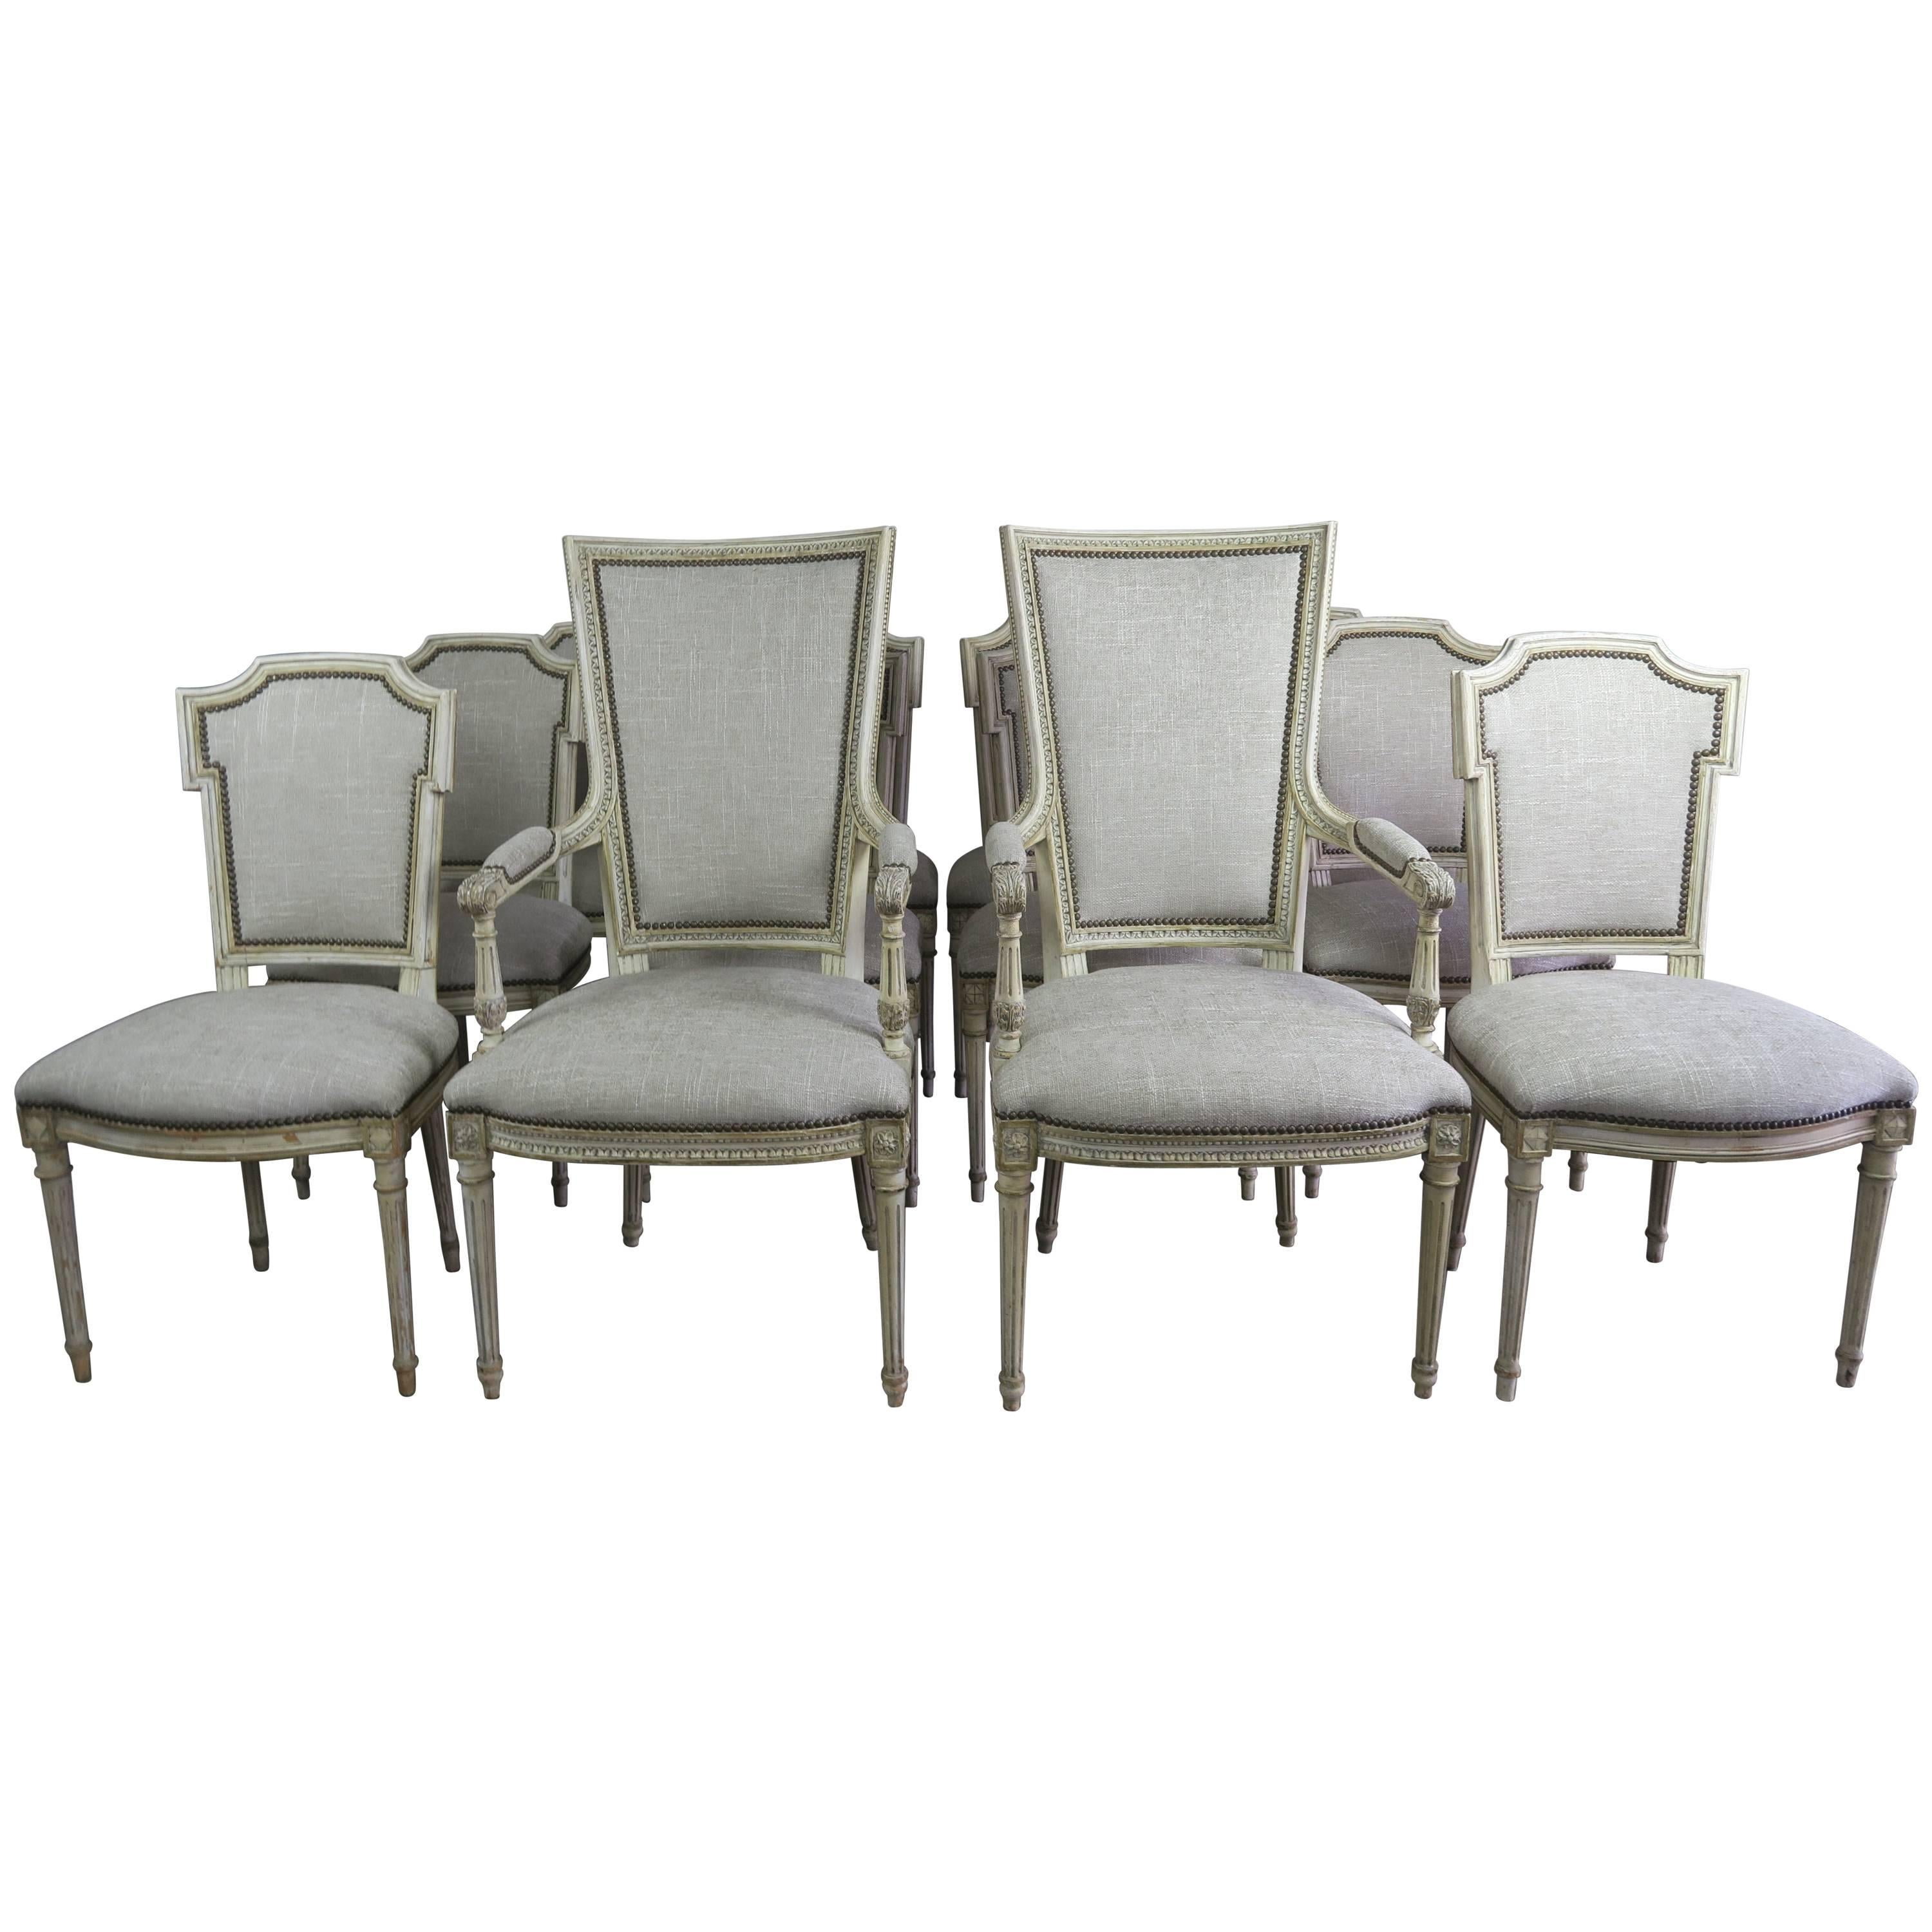 Set of 12 Louis XVI Style Neoclassical Dining Room Chairs